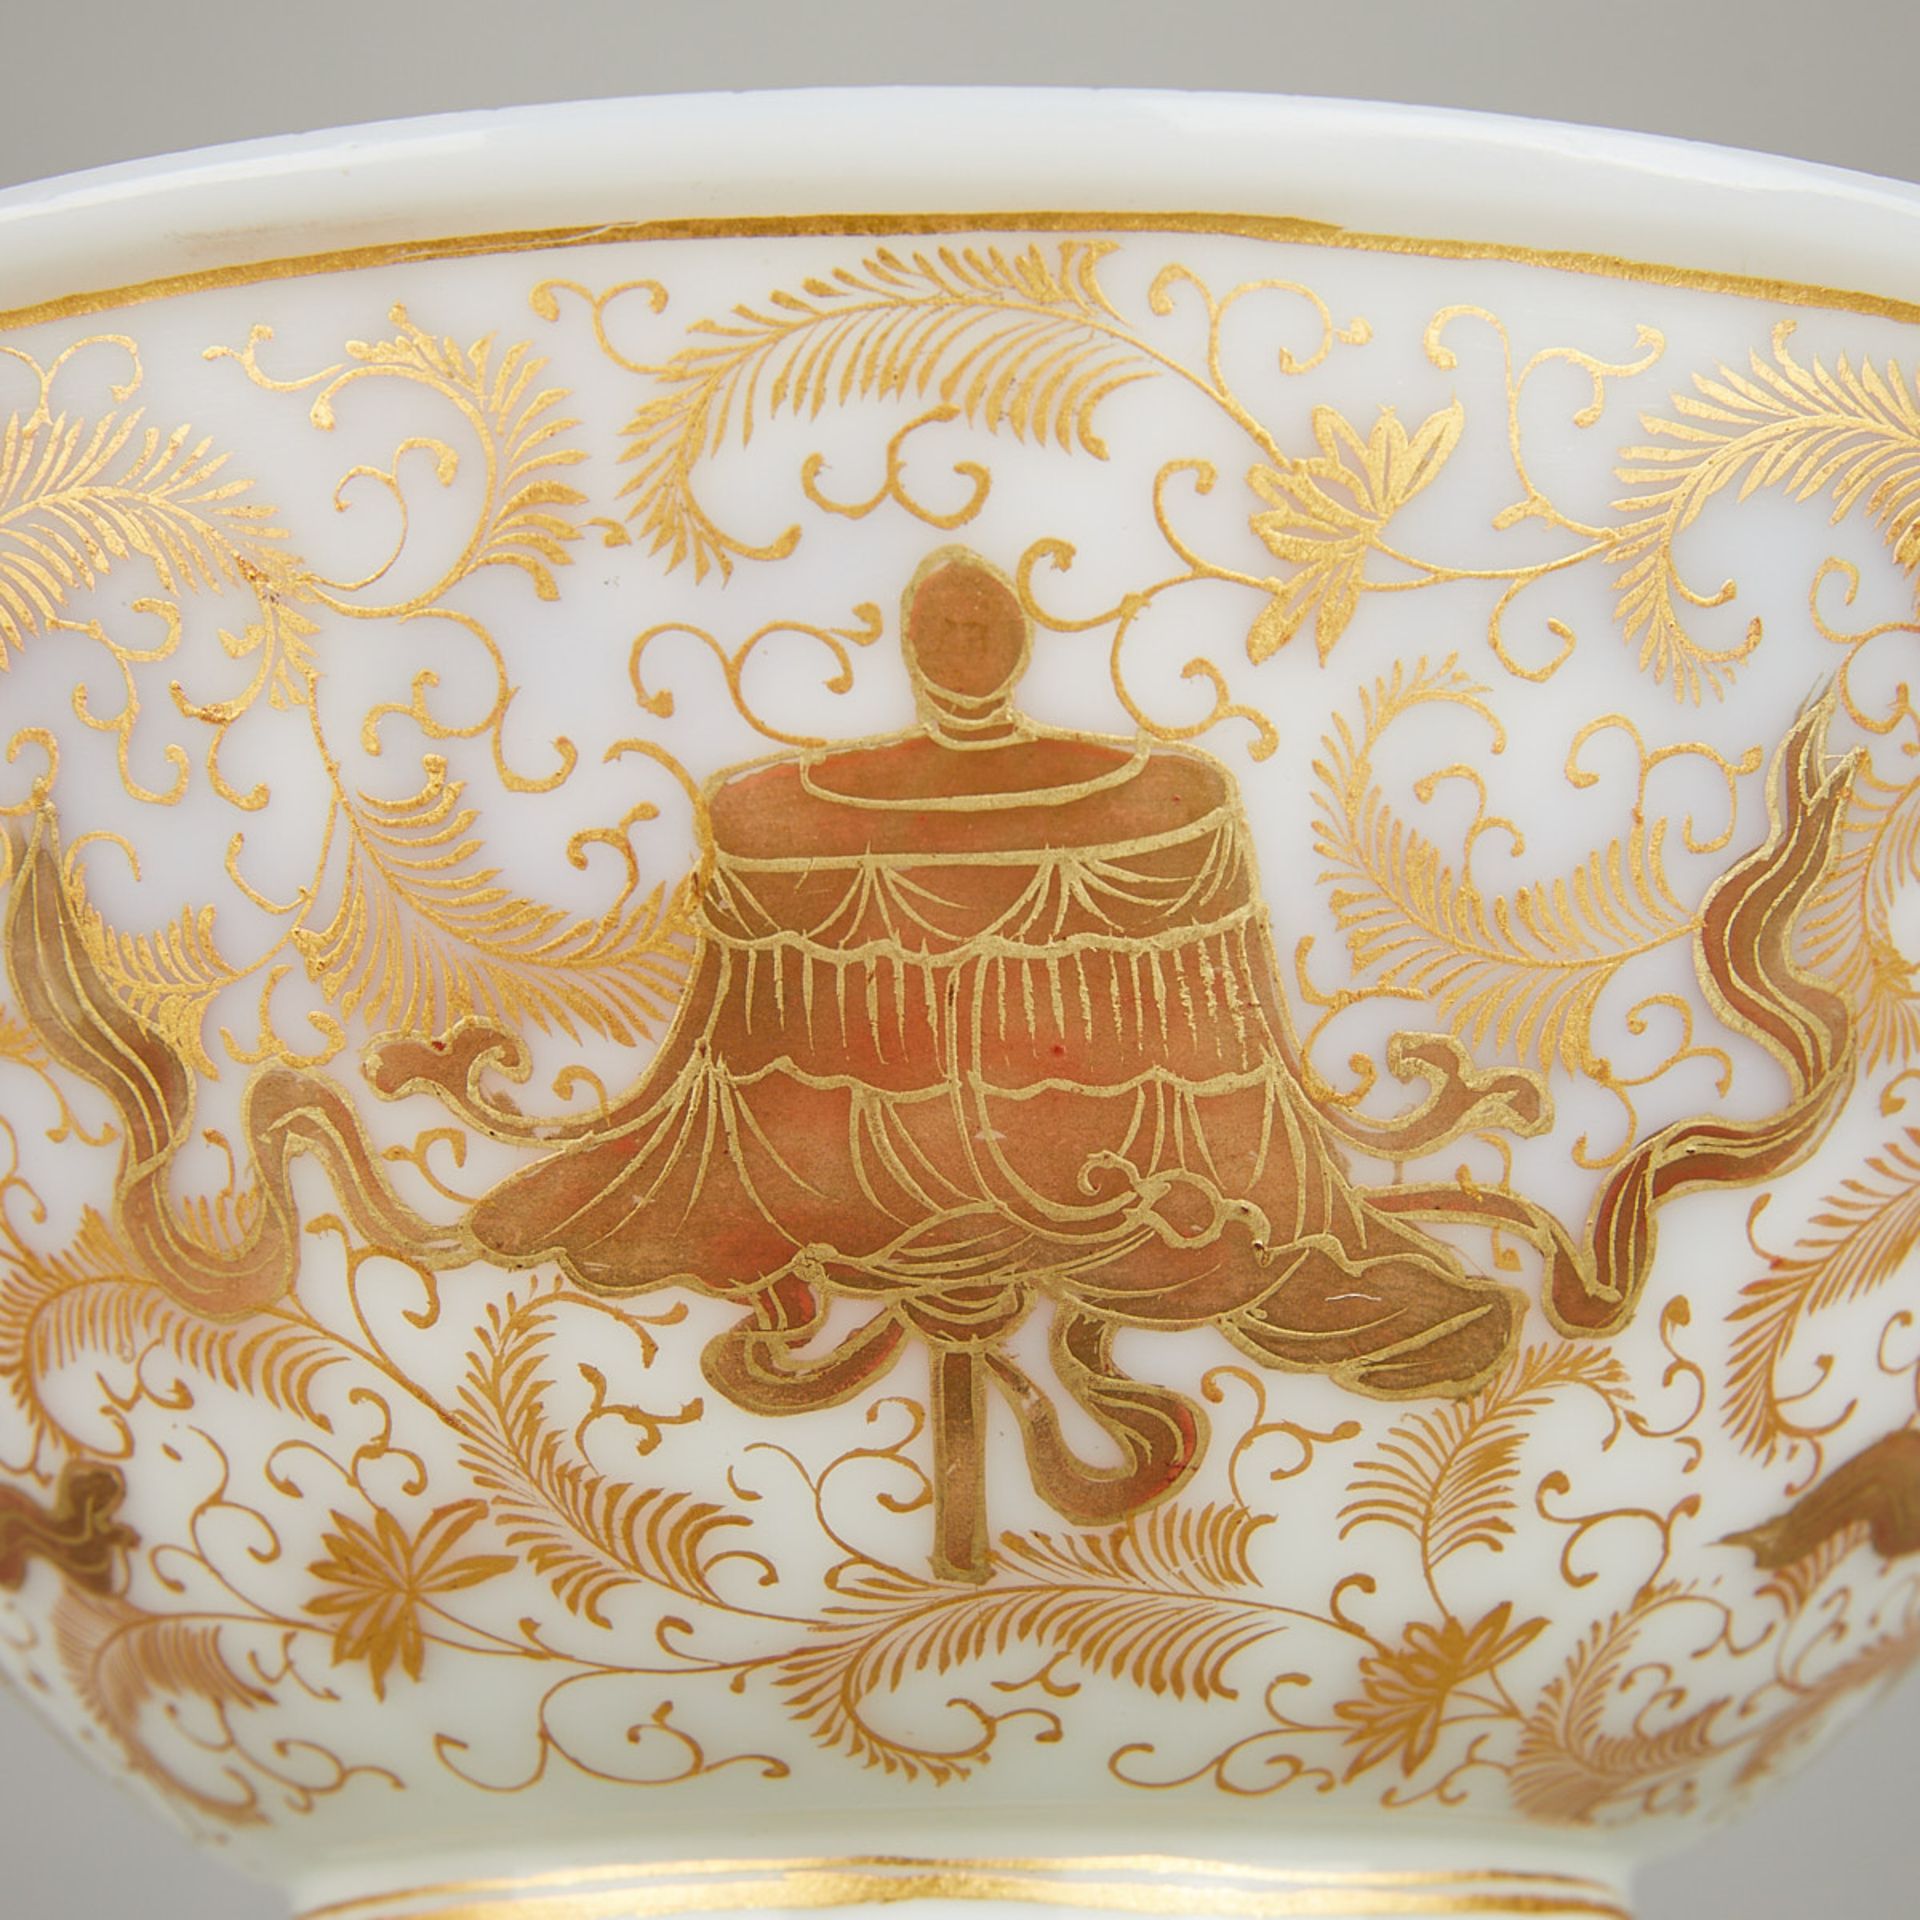 Rare Chinese Gilt Semi-Opaque White Glass Bowl - Image 12 of 16